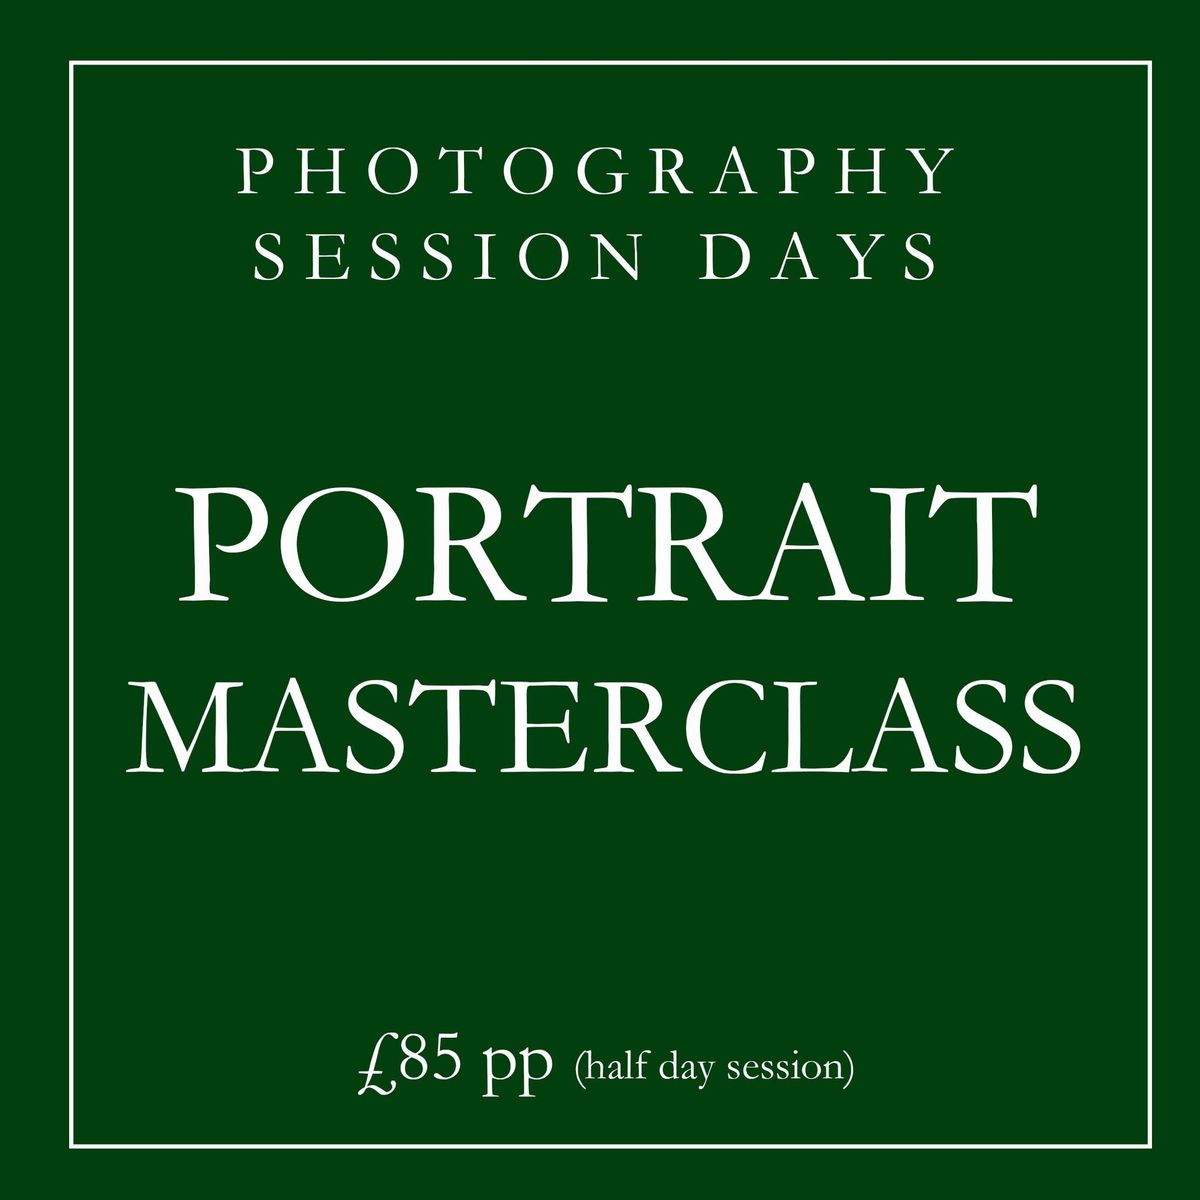 Session Day's Portrait Masterclass SOLD OUT